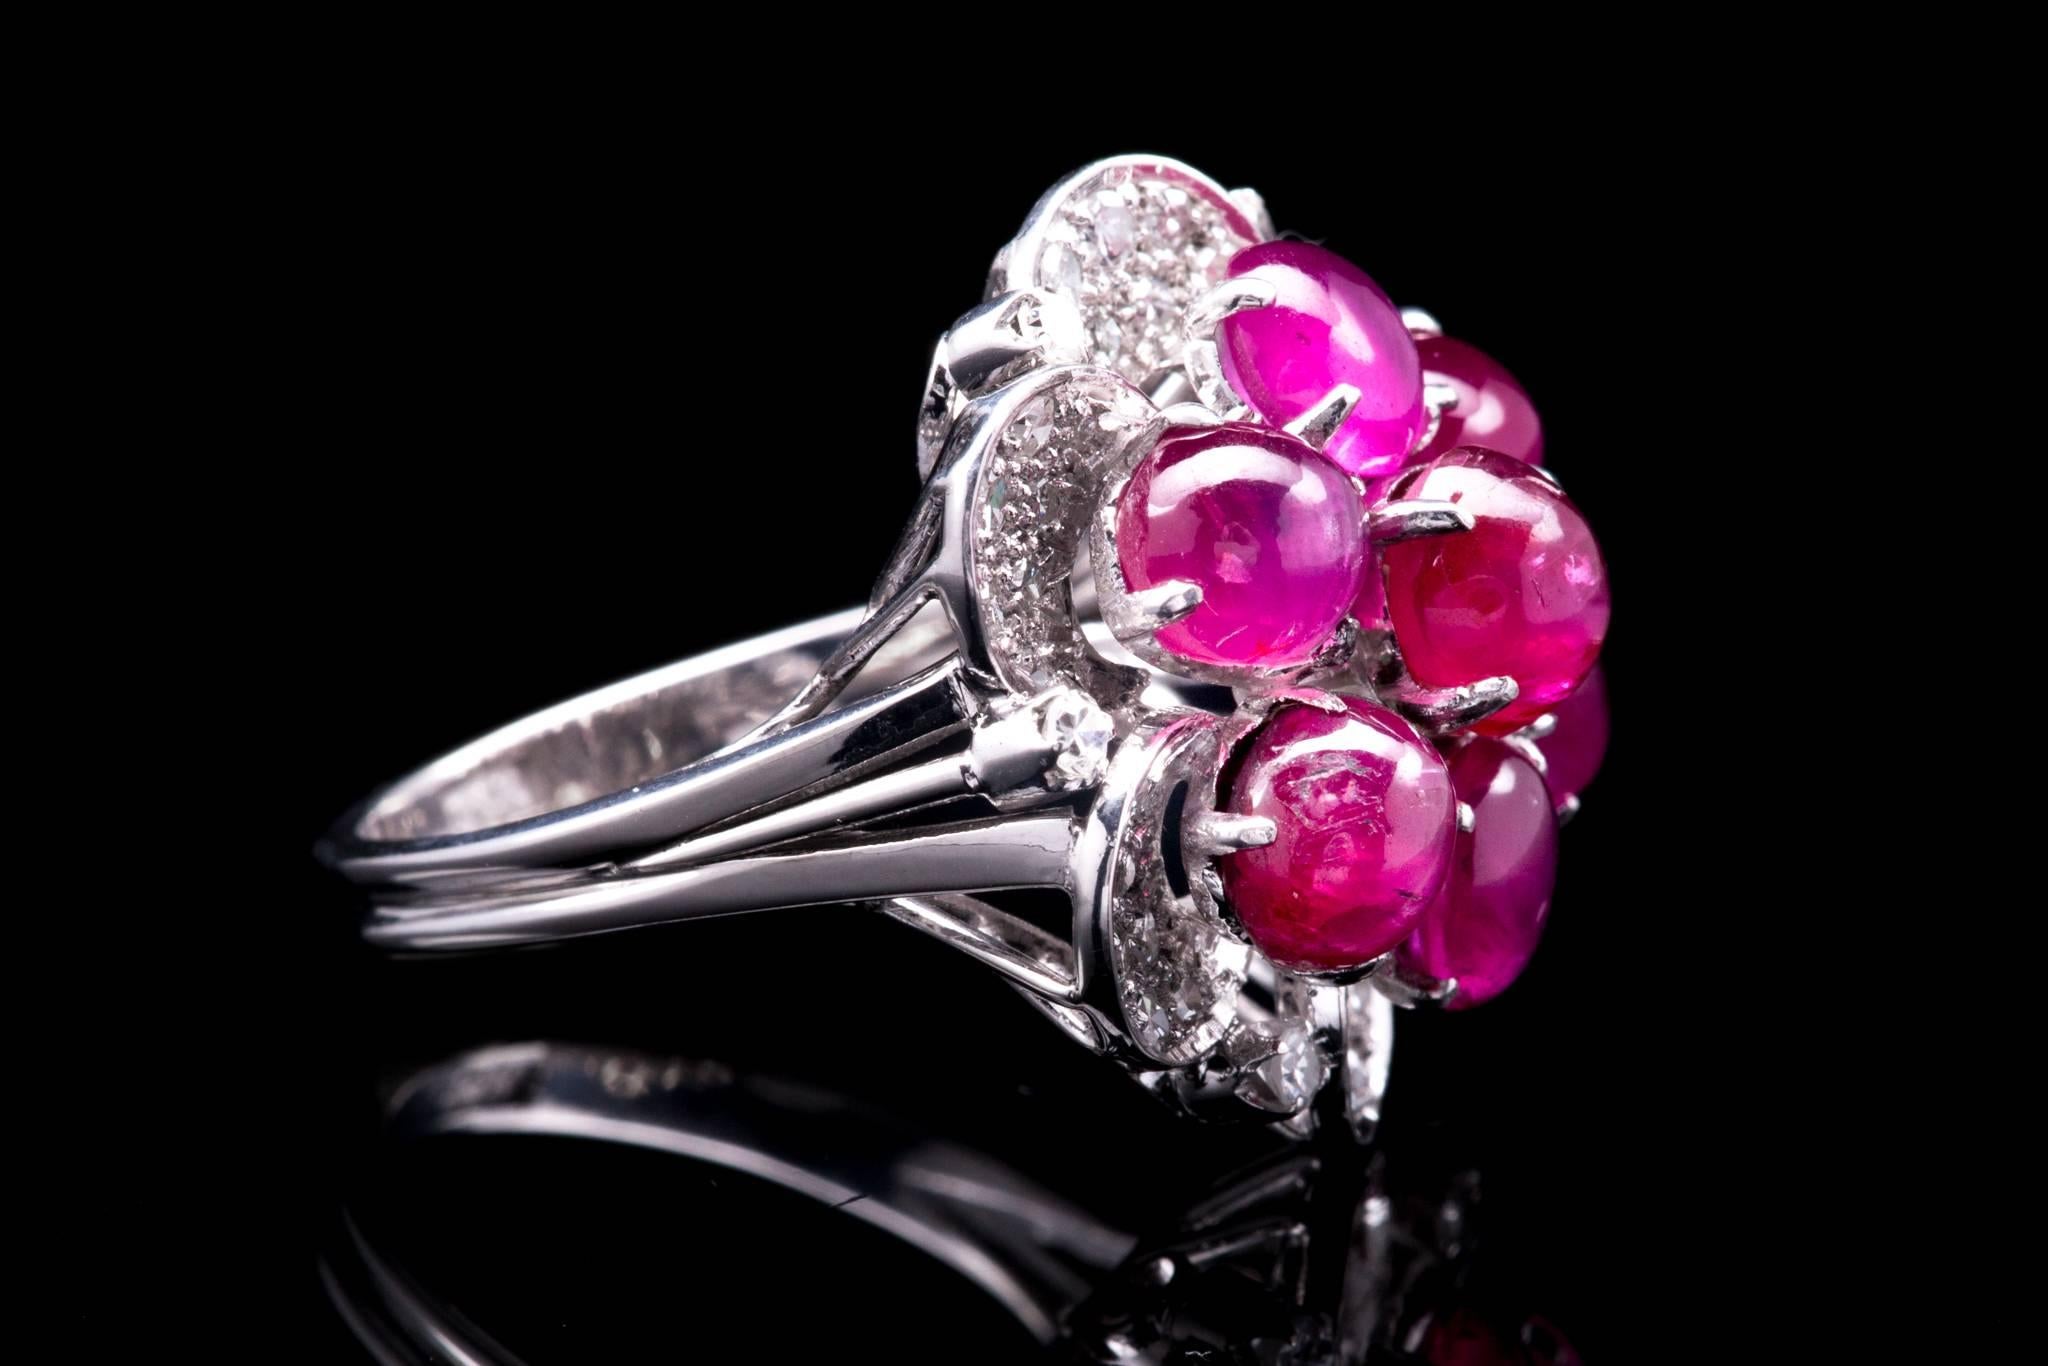 A beautiful mid century ruby, and diamond flower shape ring in luxurious platinum.  Pave set with a background of dazzling diamonds this ring features seven bright richly colored cabochon rubies set in platinum.

Weighing approximately 9 carats